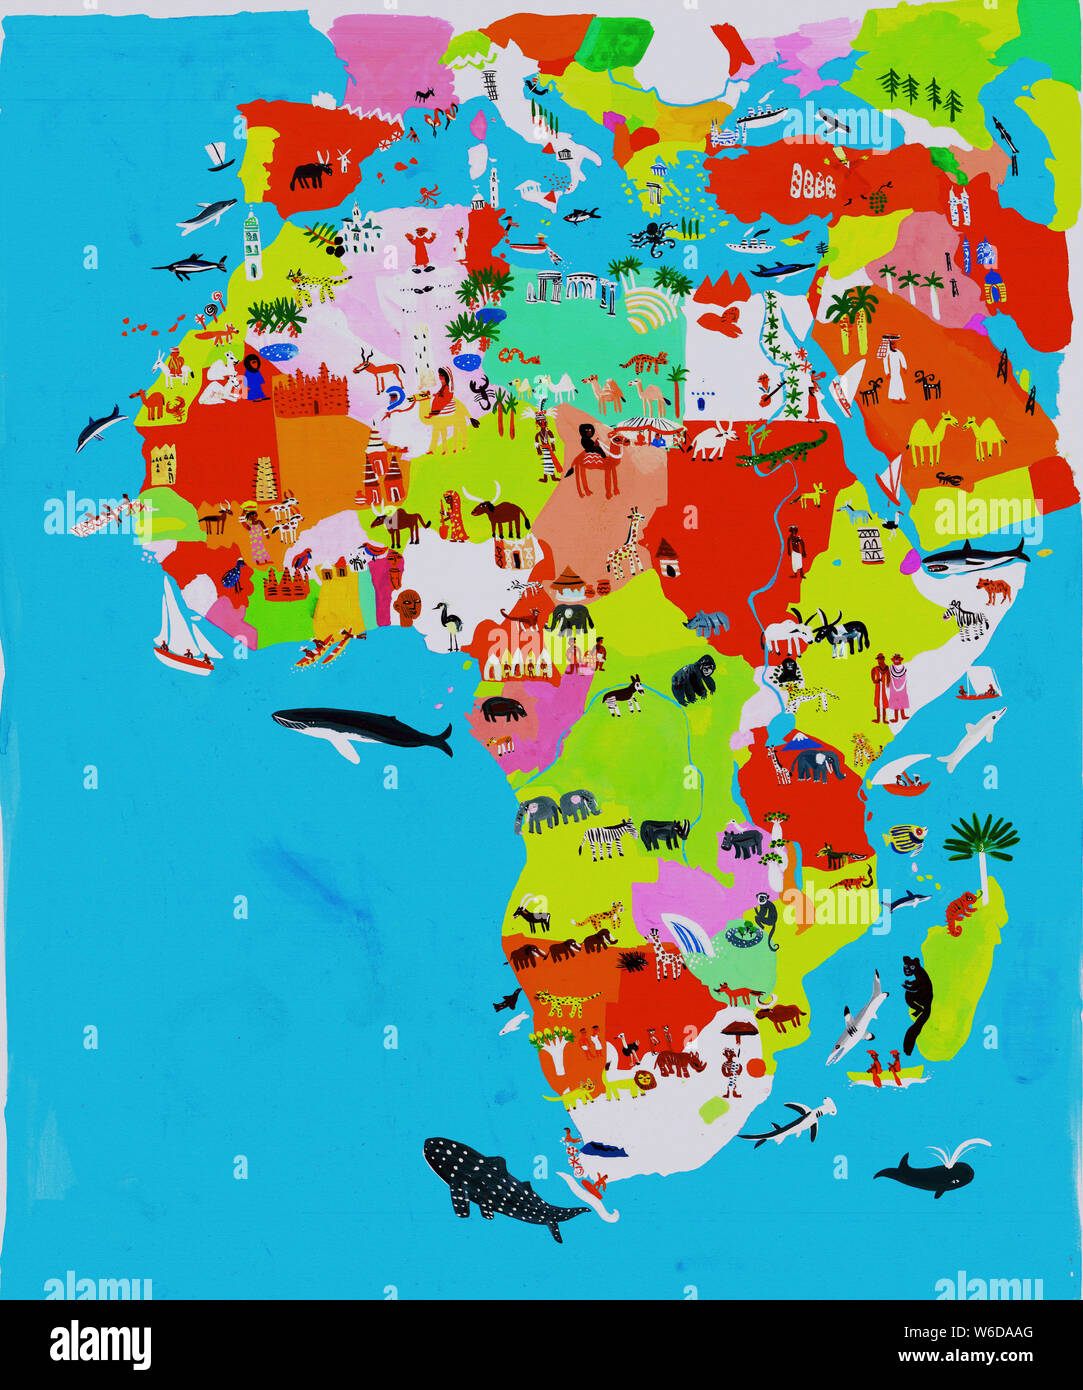 Illustrated map of African and Middle Eastern culture and wildlife Stock Photo